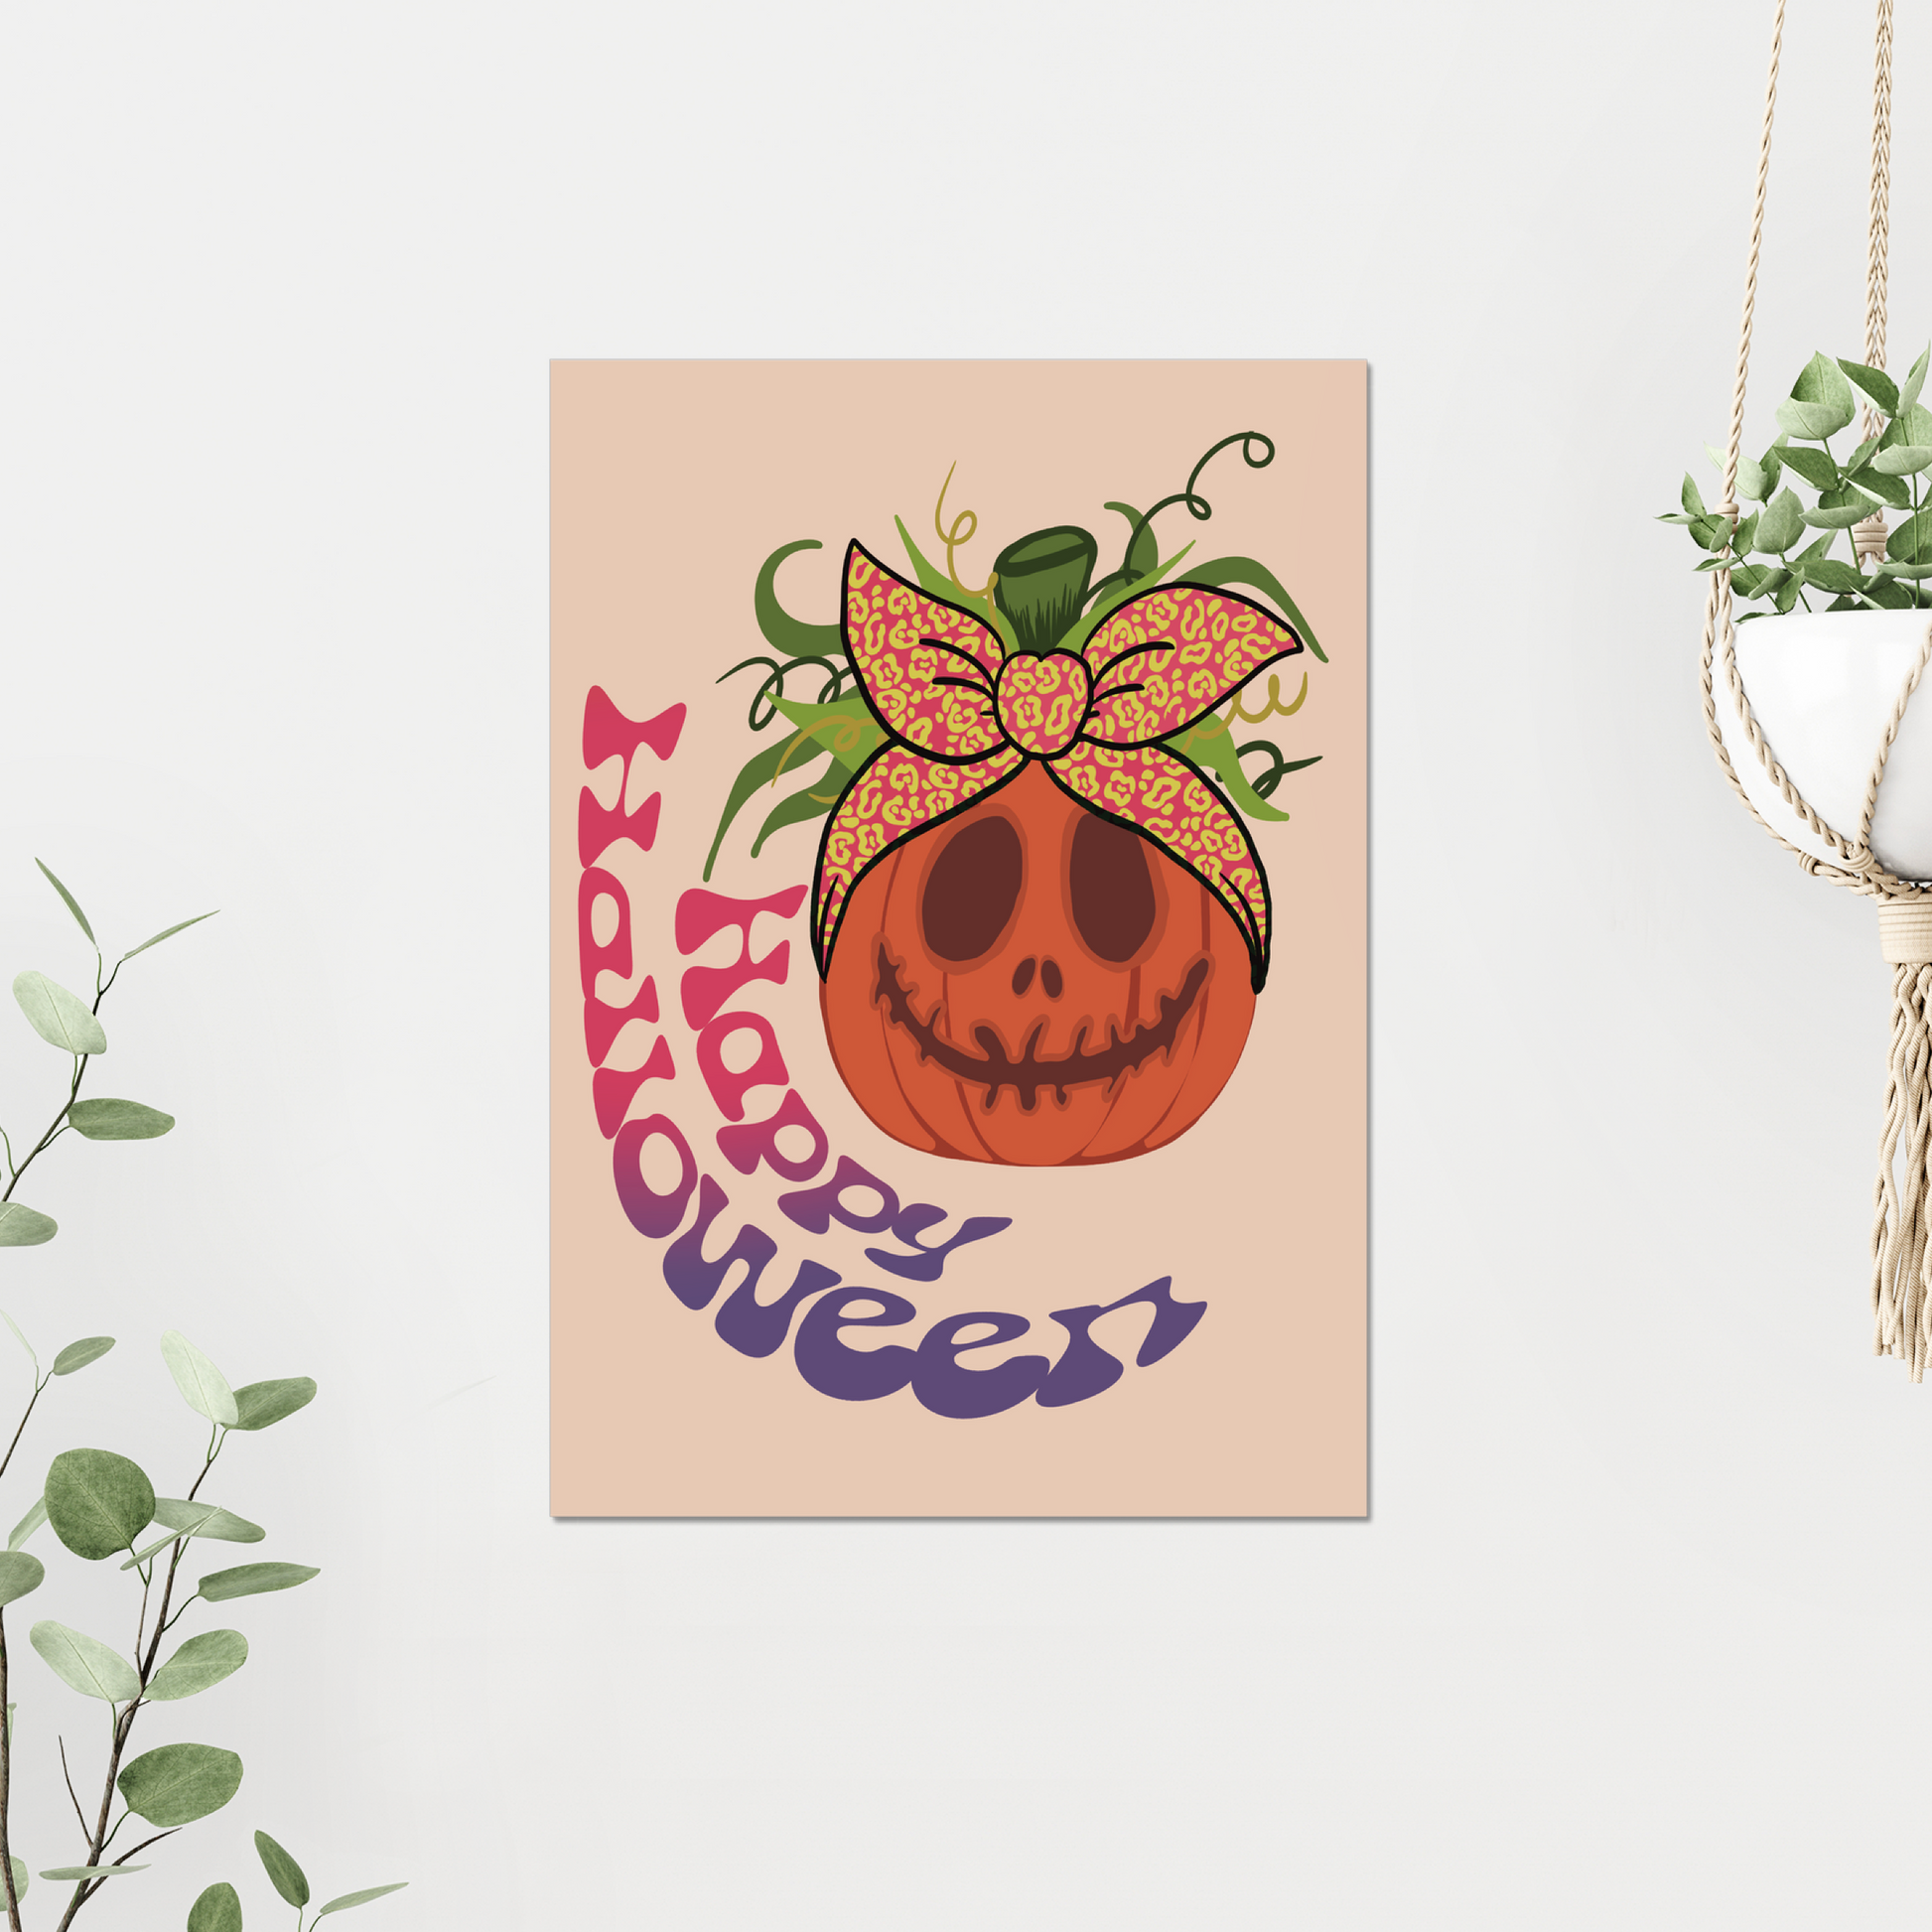 The Happy Halloween Pumpkin Art Print is perfect for decorating any home this Halloween season. Add a splash of color to your walls with this funky, retro styled print! Order today and get free shipping on all orders over £50!